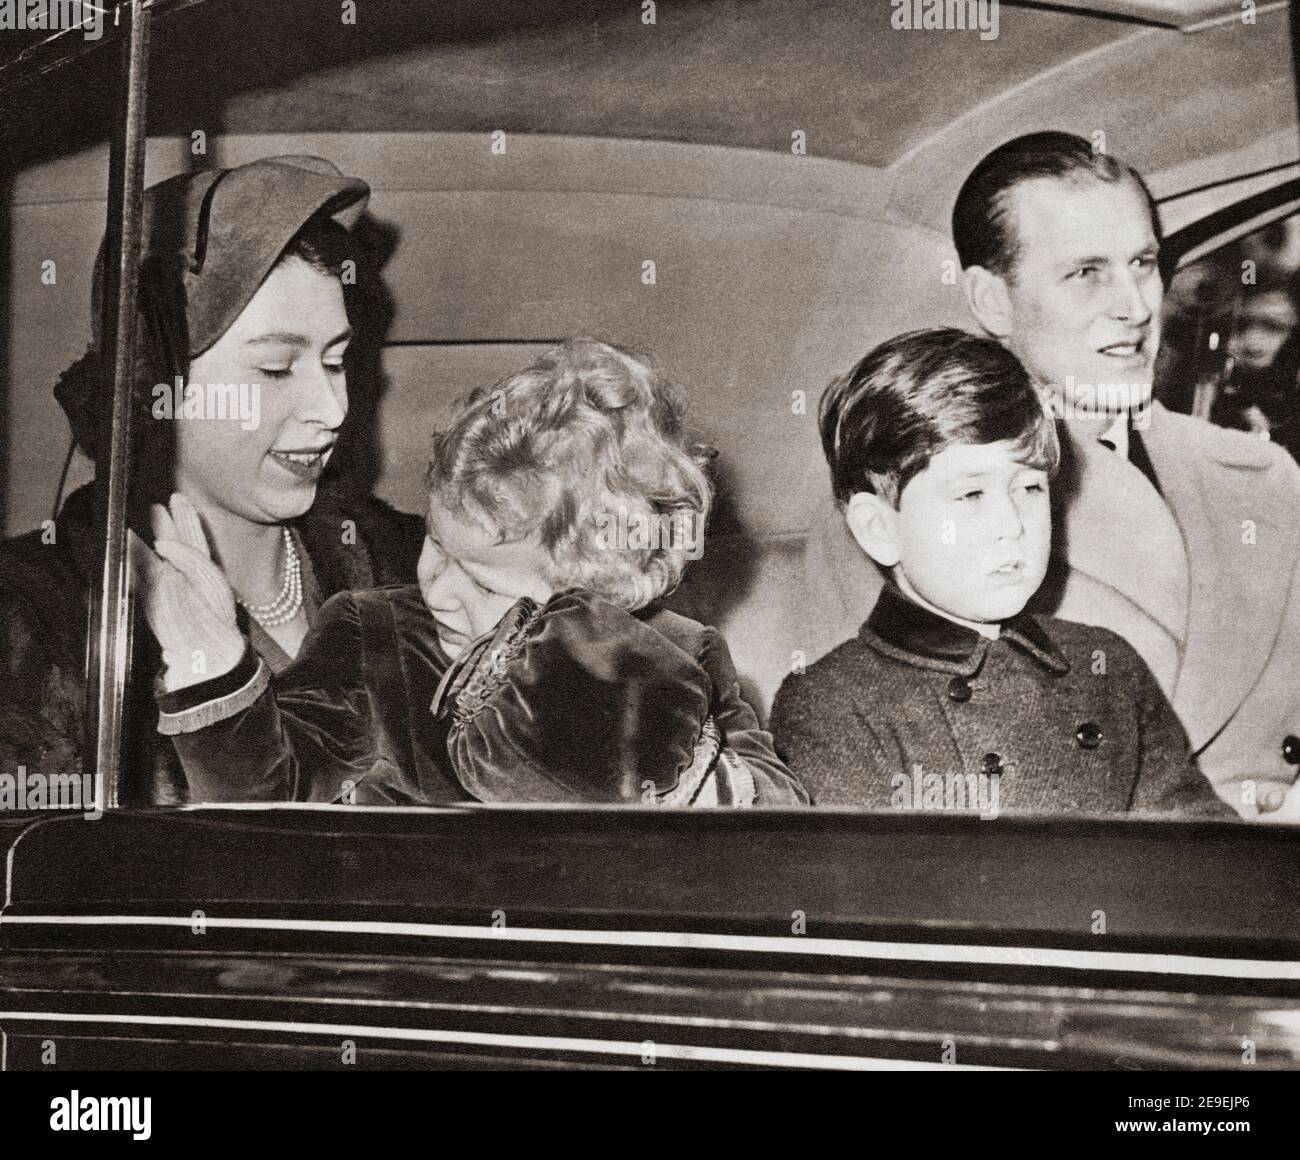 EDITORIAL The Royal Family arrive back in London after a stay in Sandringham. Elizabeth II, Queen of the United Kingdom, 1926 - 2022. Prince Philip, Duke of Edinburgh, born Prince Philip of Greece and Denmark,1921-2021. Husband of Queen Elizabeth II of the United Kingdom. Charles, Prince of Wales, born 1948.  Heir apparent to the British throne as the eldest son of Queen Elizabeth II.  Anne, Princess Royal, Anne Elizabeth Alice Louise, born1950. Second child and only daughter of Queen Elizabeth II and Prince Philip, Duke of Edinburgh. Stock Photo